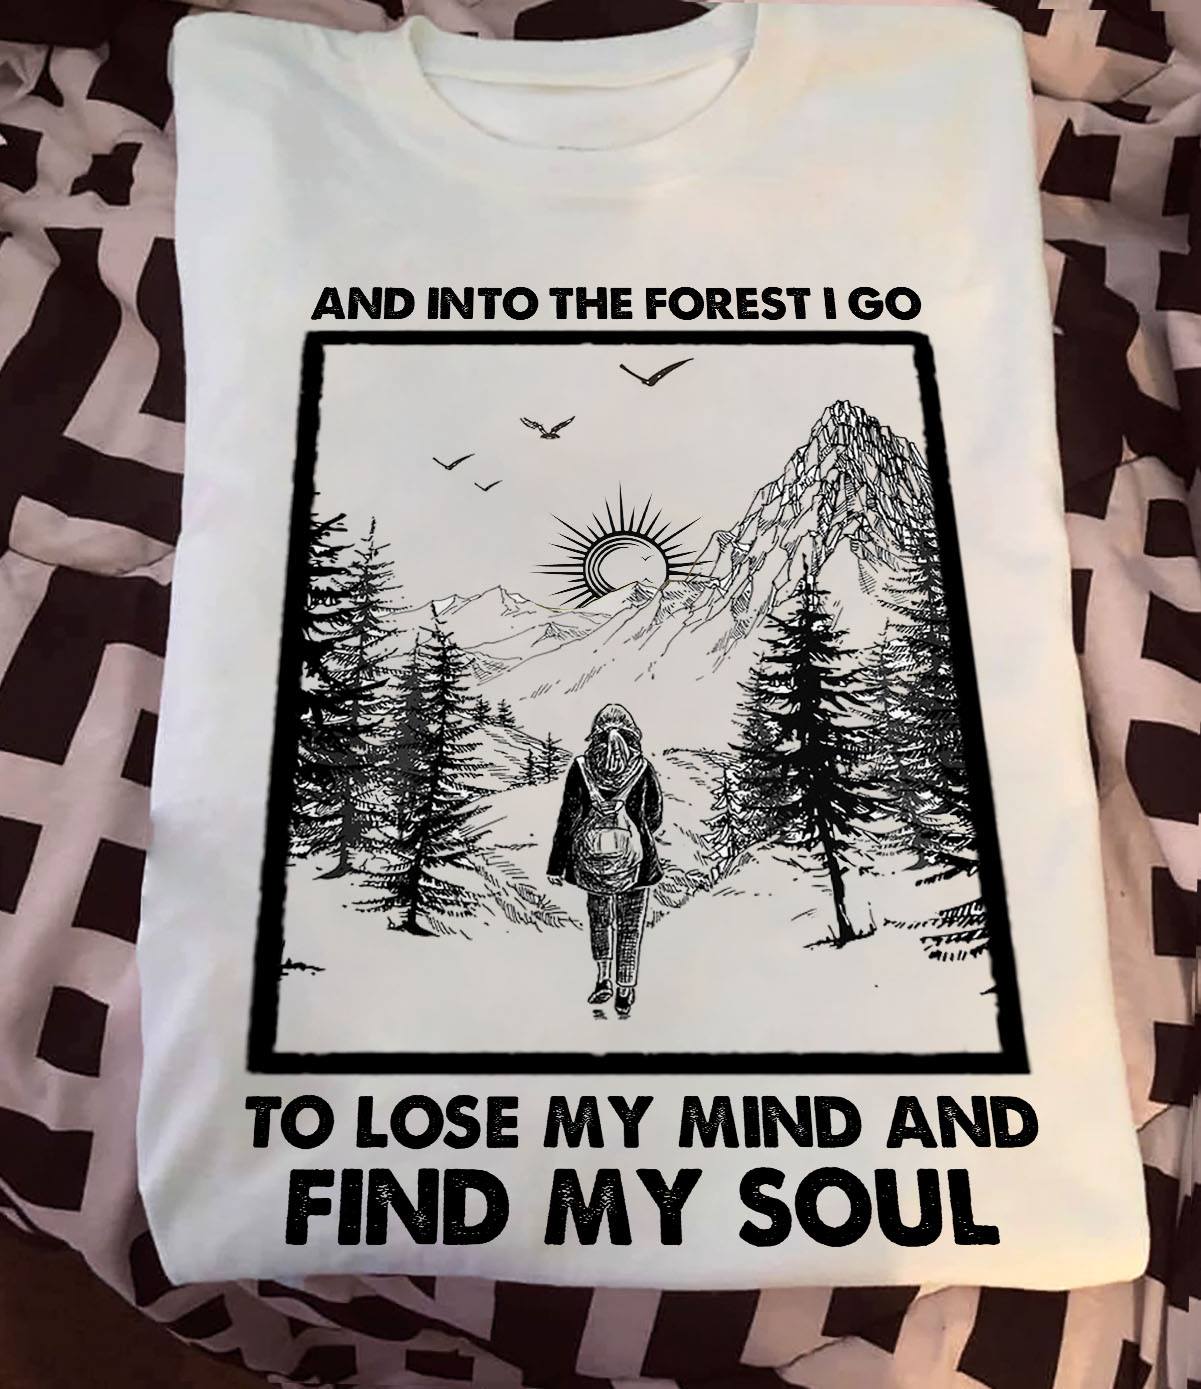 And into the forest I go to lose my mind and find my soul - Girl into the forest